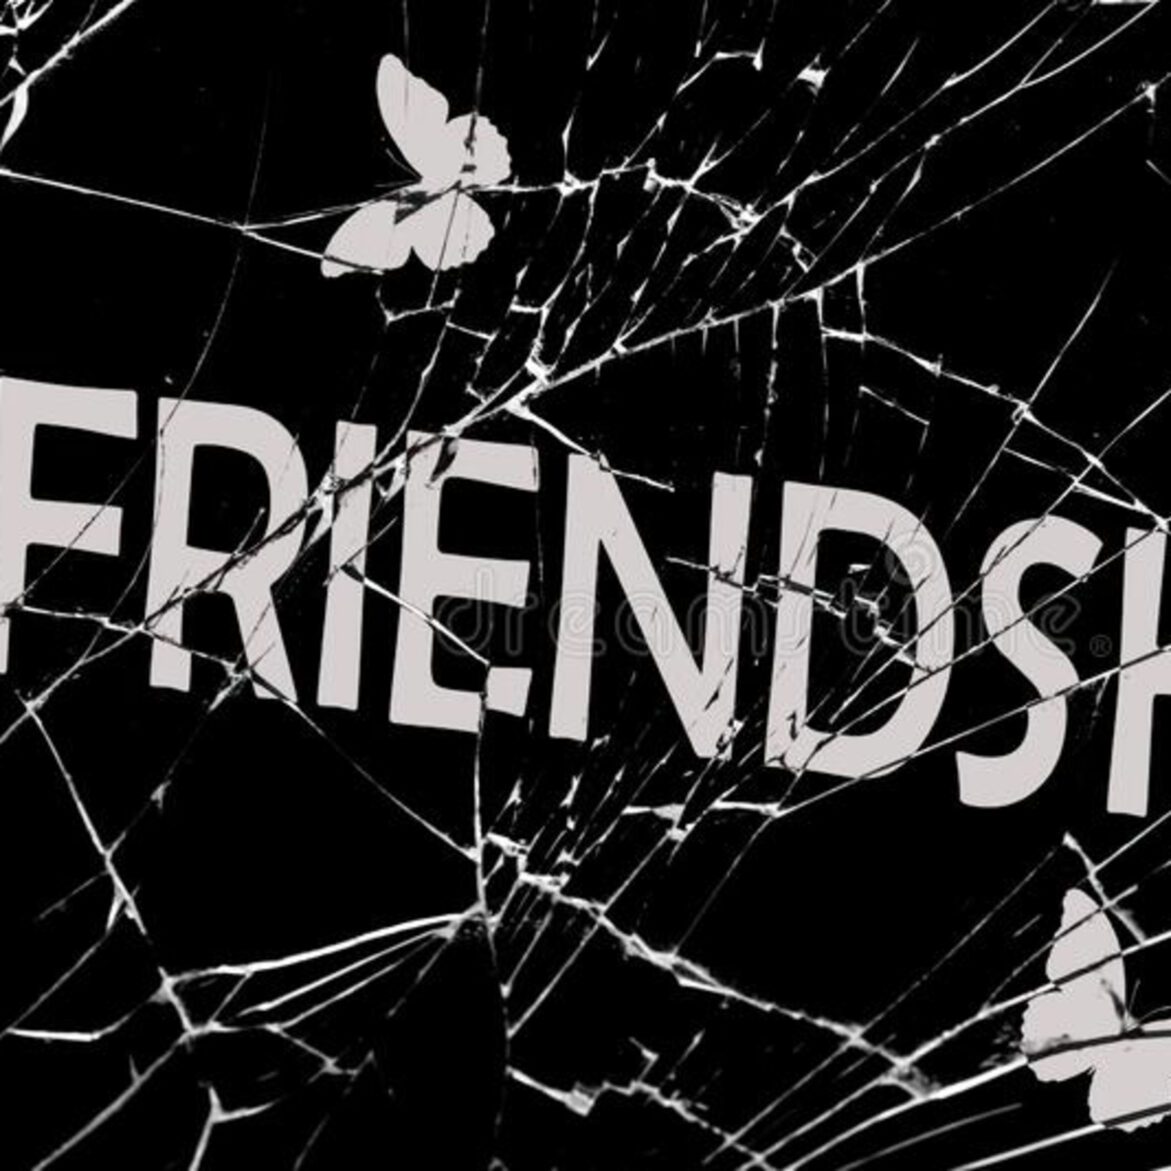 Black Podcasting - Ep. 116 “Faulty Friendships”